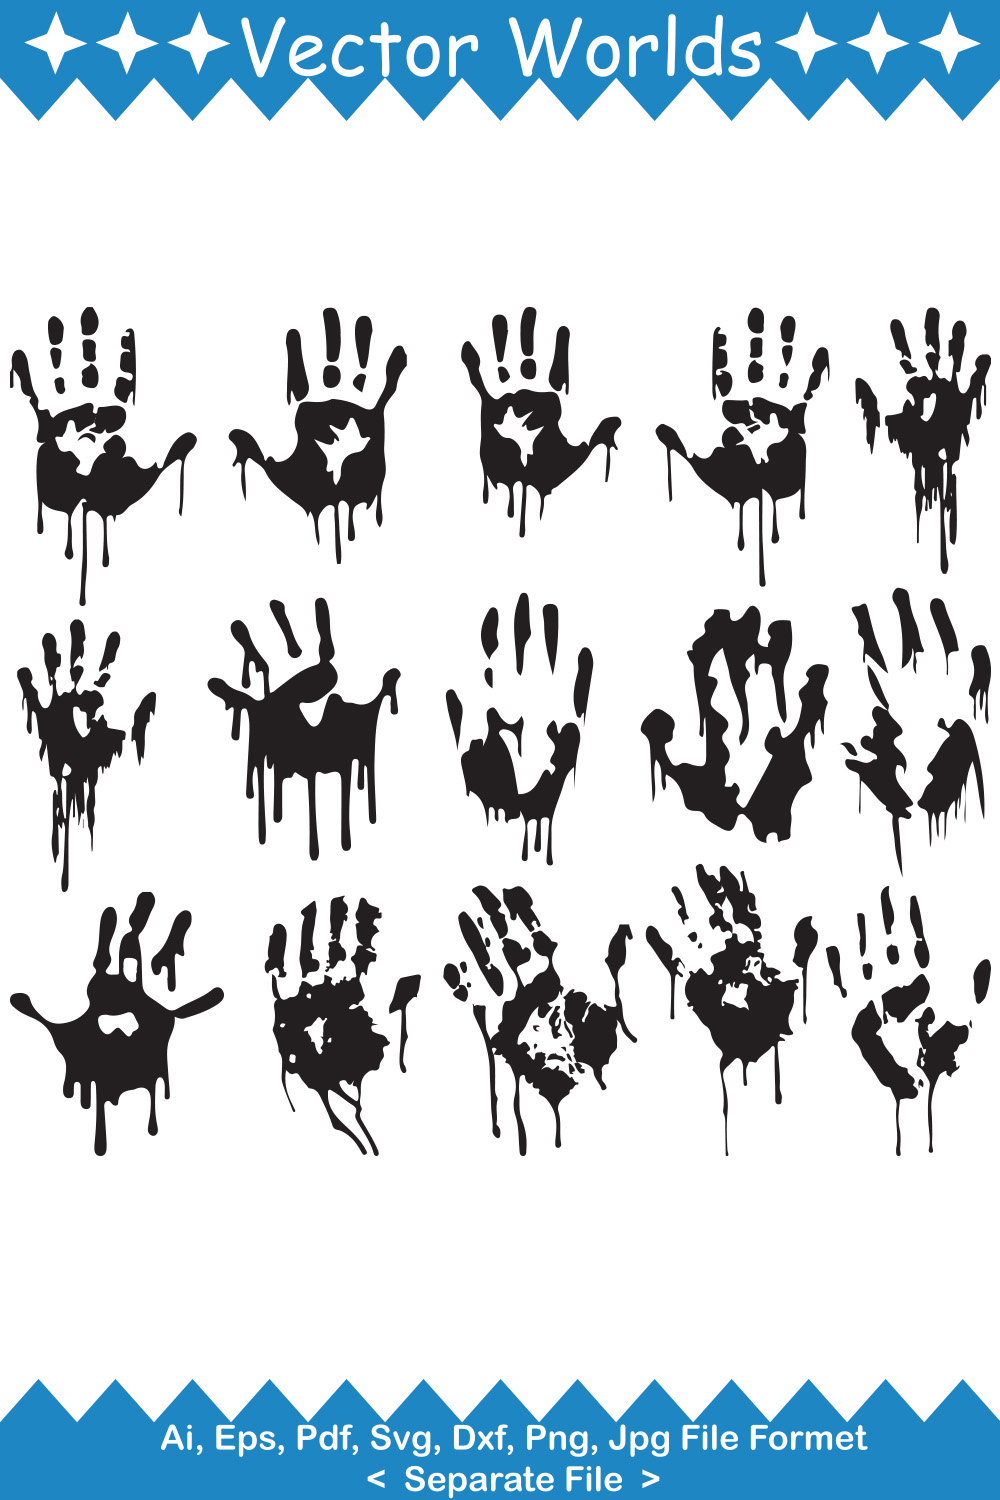 Compilation of vector irresistible images of bloody hand silhouettes.